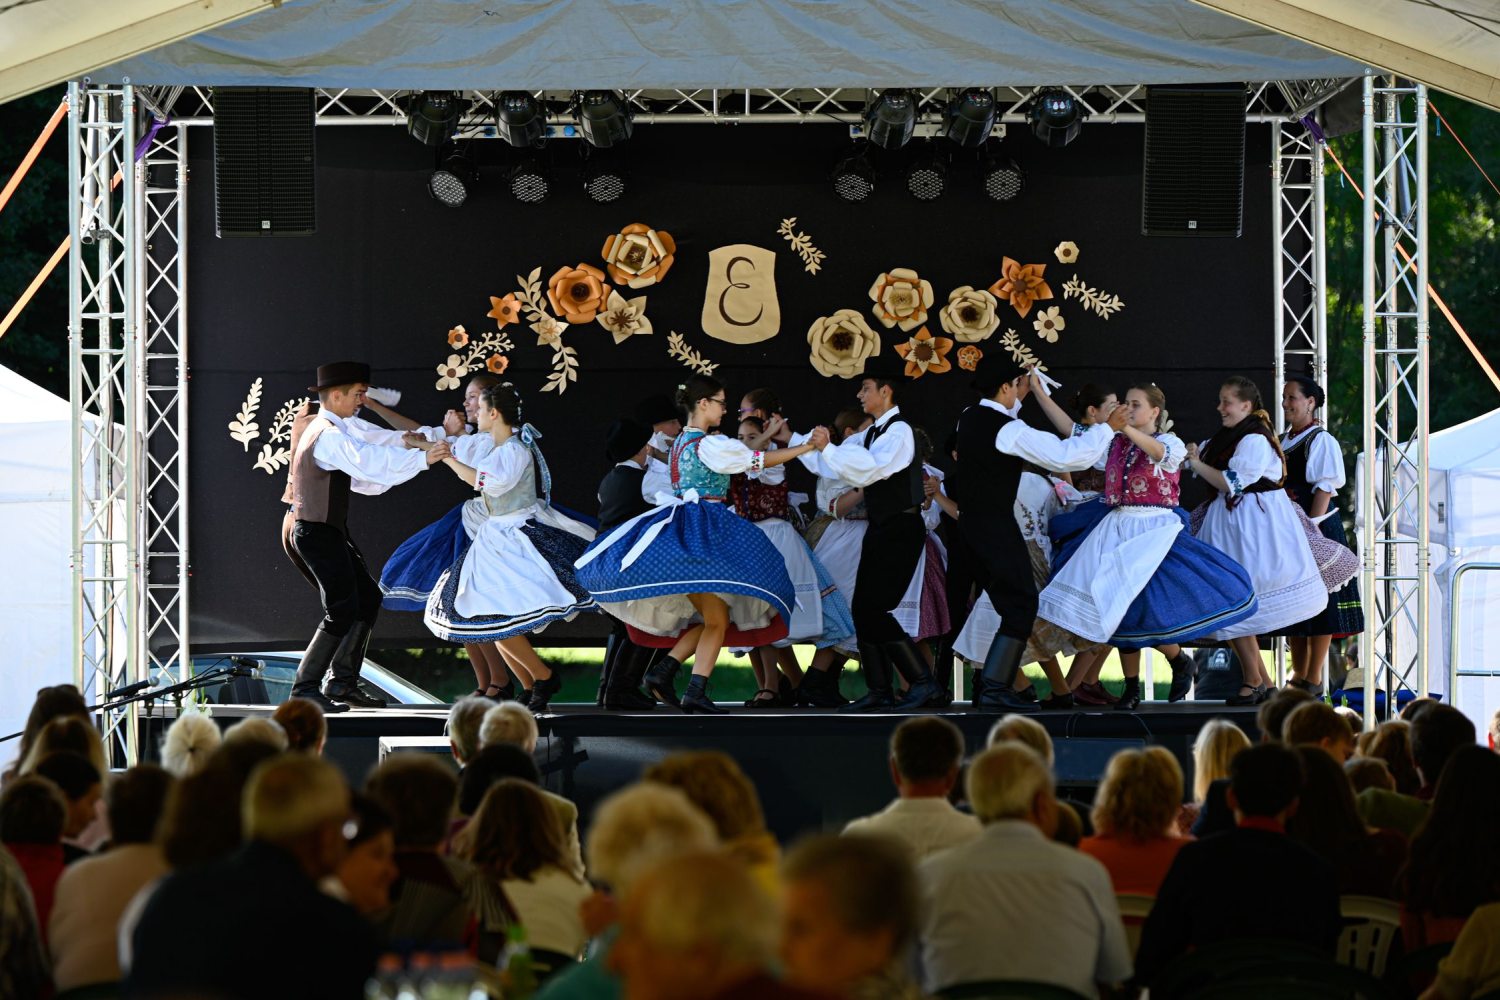 Hungarian folk dancers on the stage